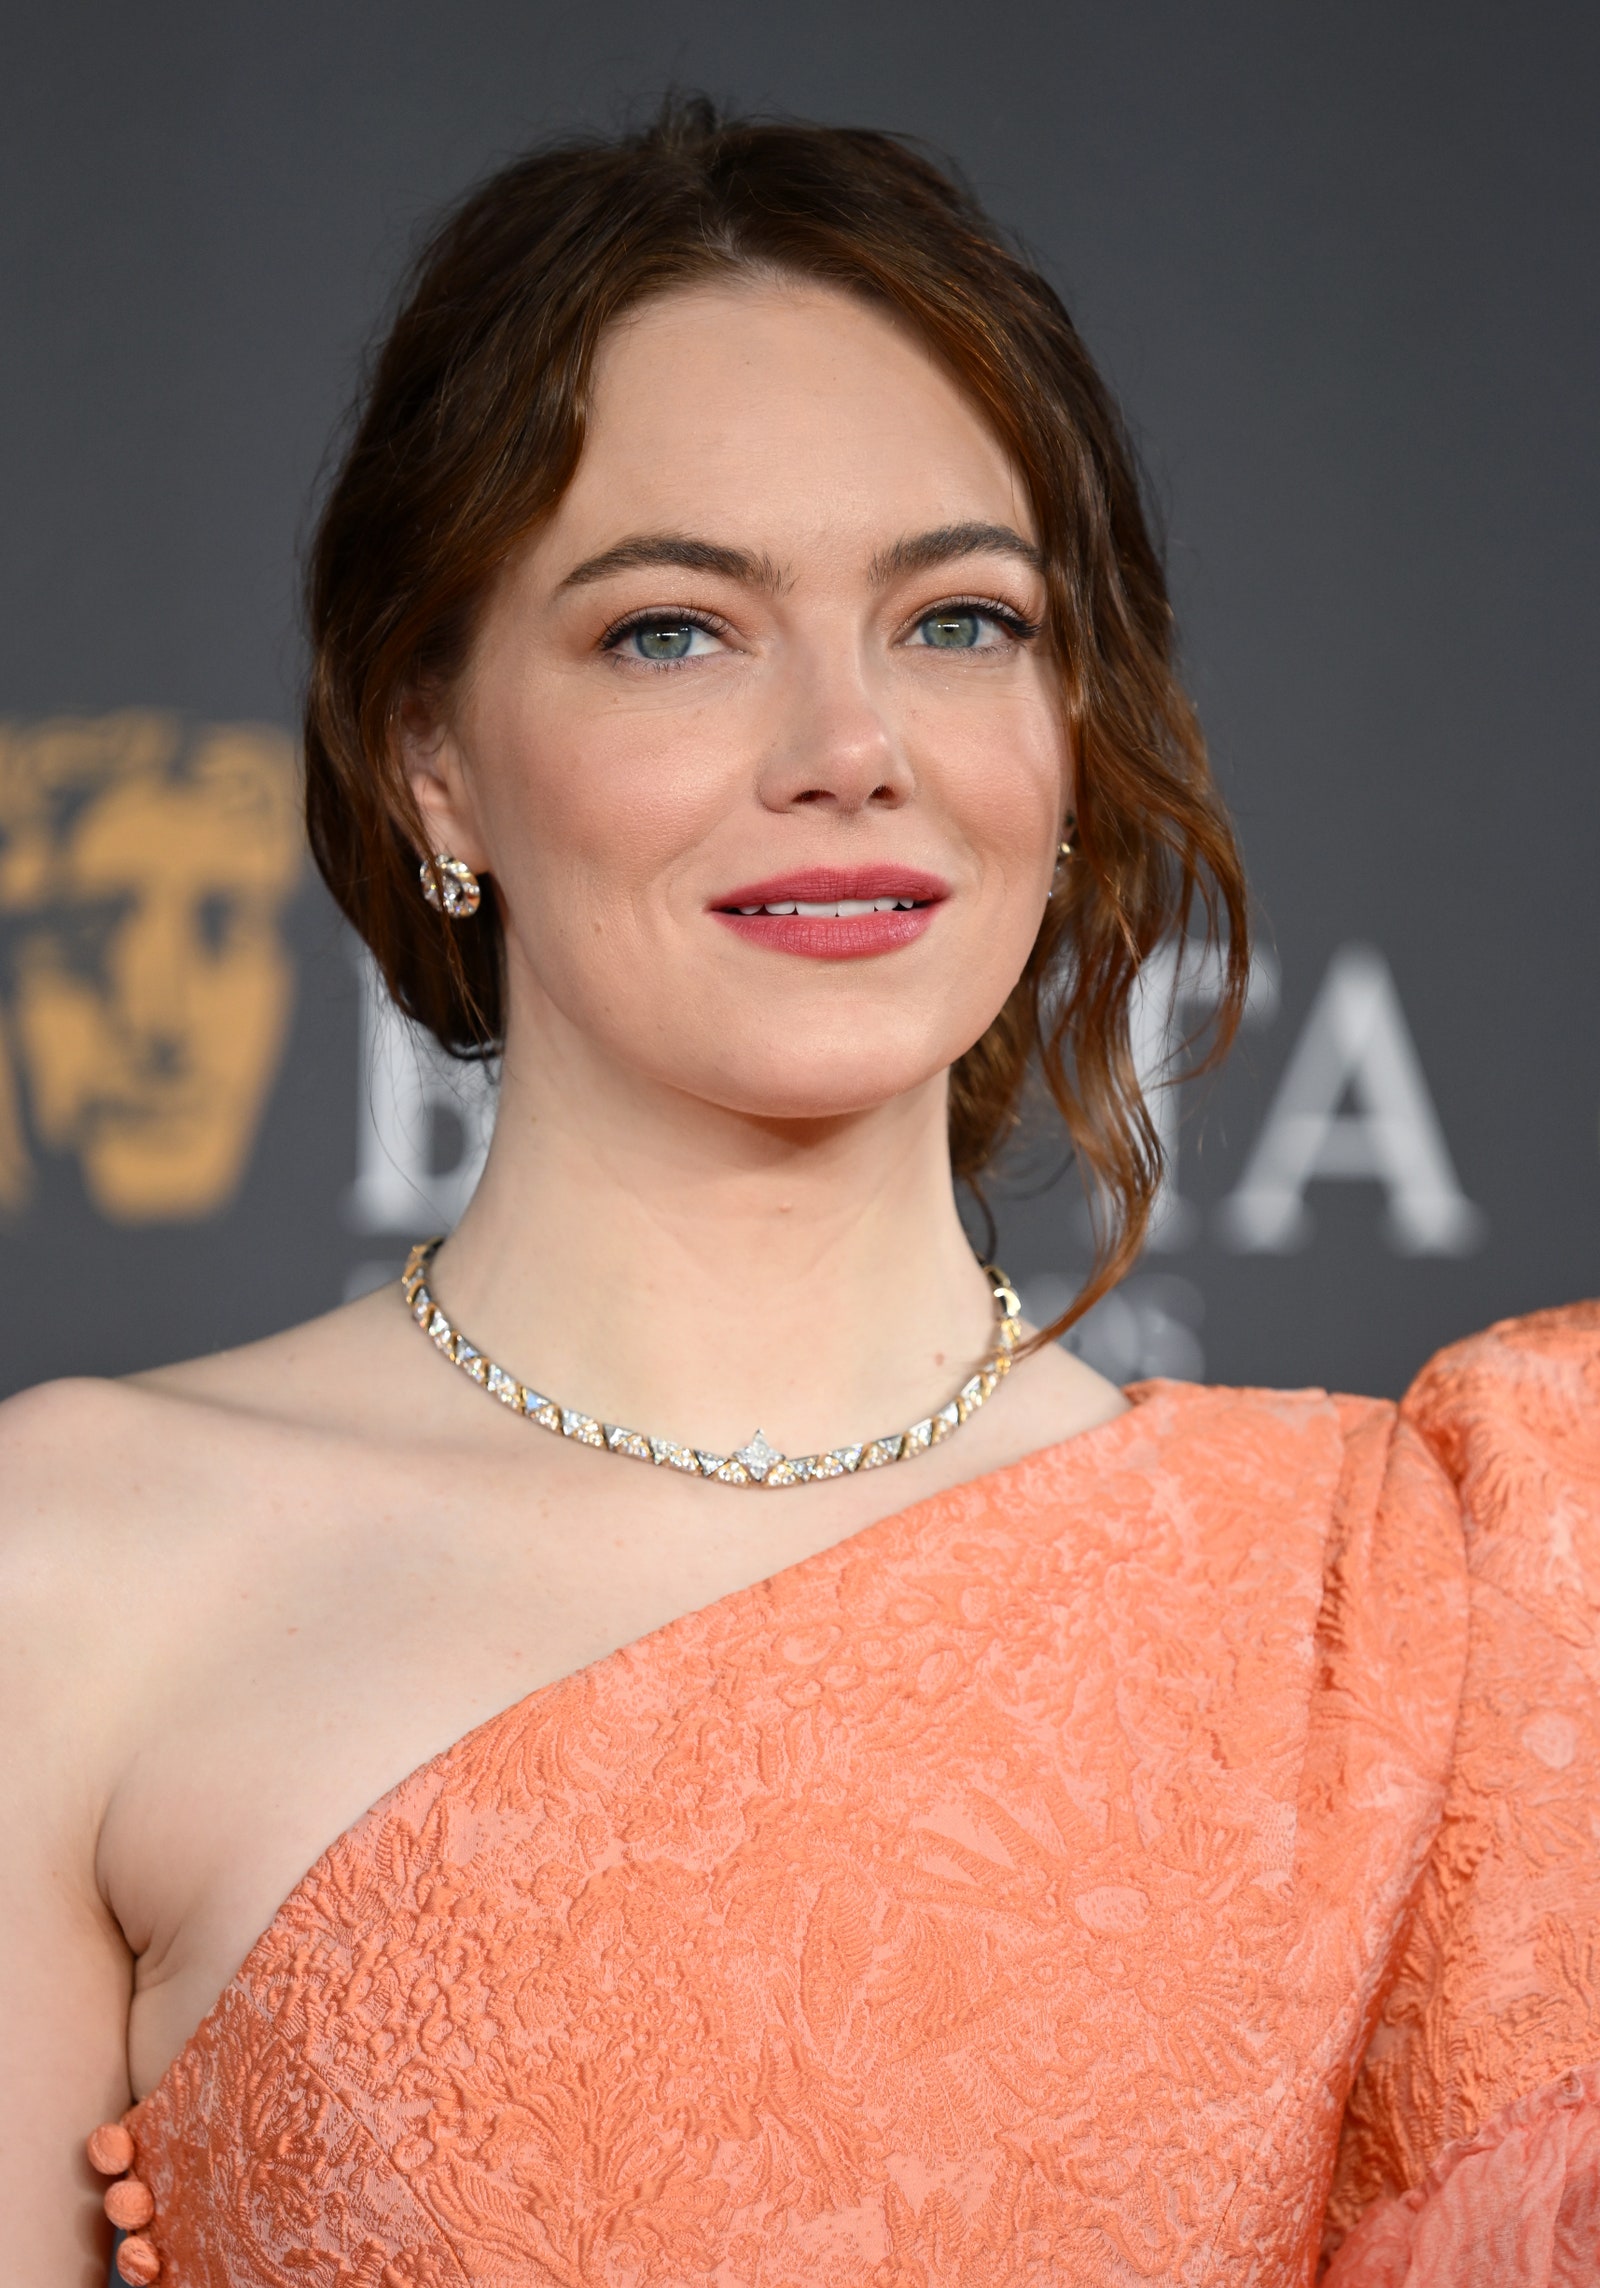 Image may contain Emma Stone Accessories Jewelry Necklace Head Person Face Adult Formal Wear Clothing and Dress